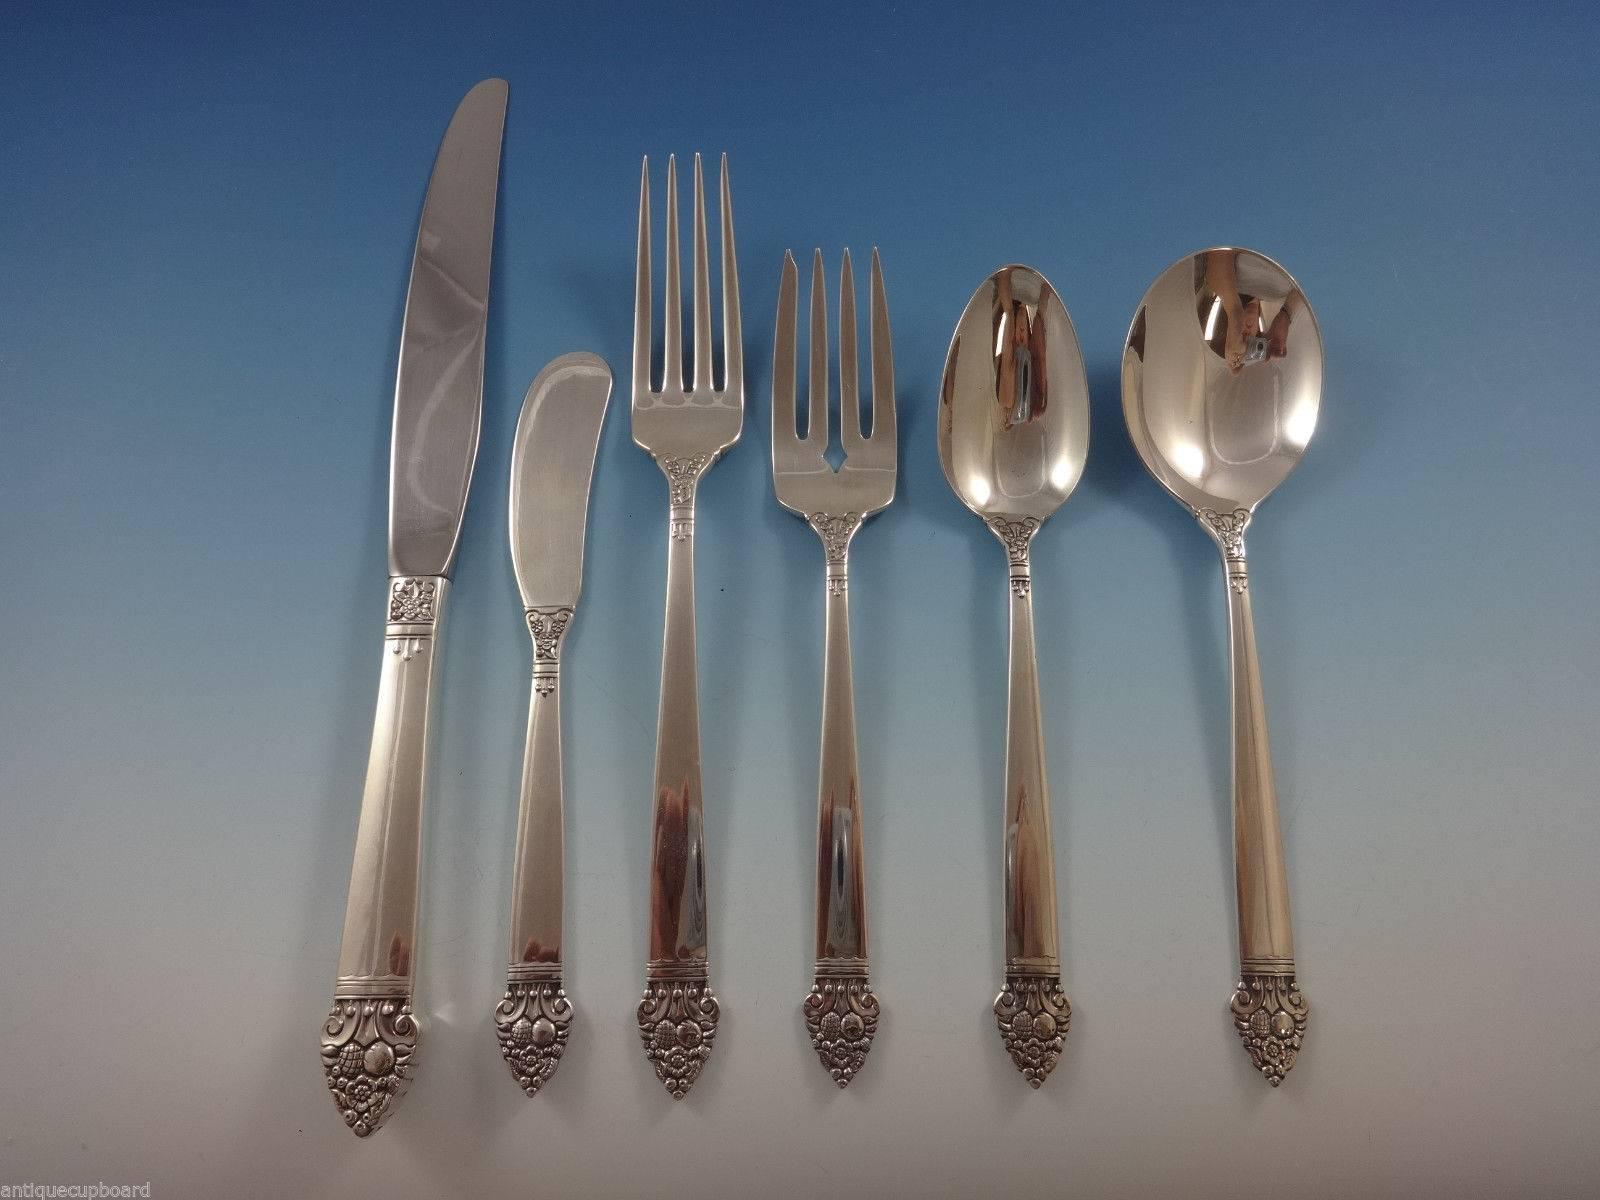 Beautiful King Cedric by Oneida Sterling silver flatware set - 80 pieces. This set includes: 

12 KNIVES, 8 7/8